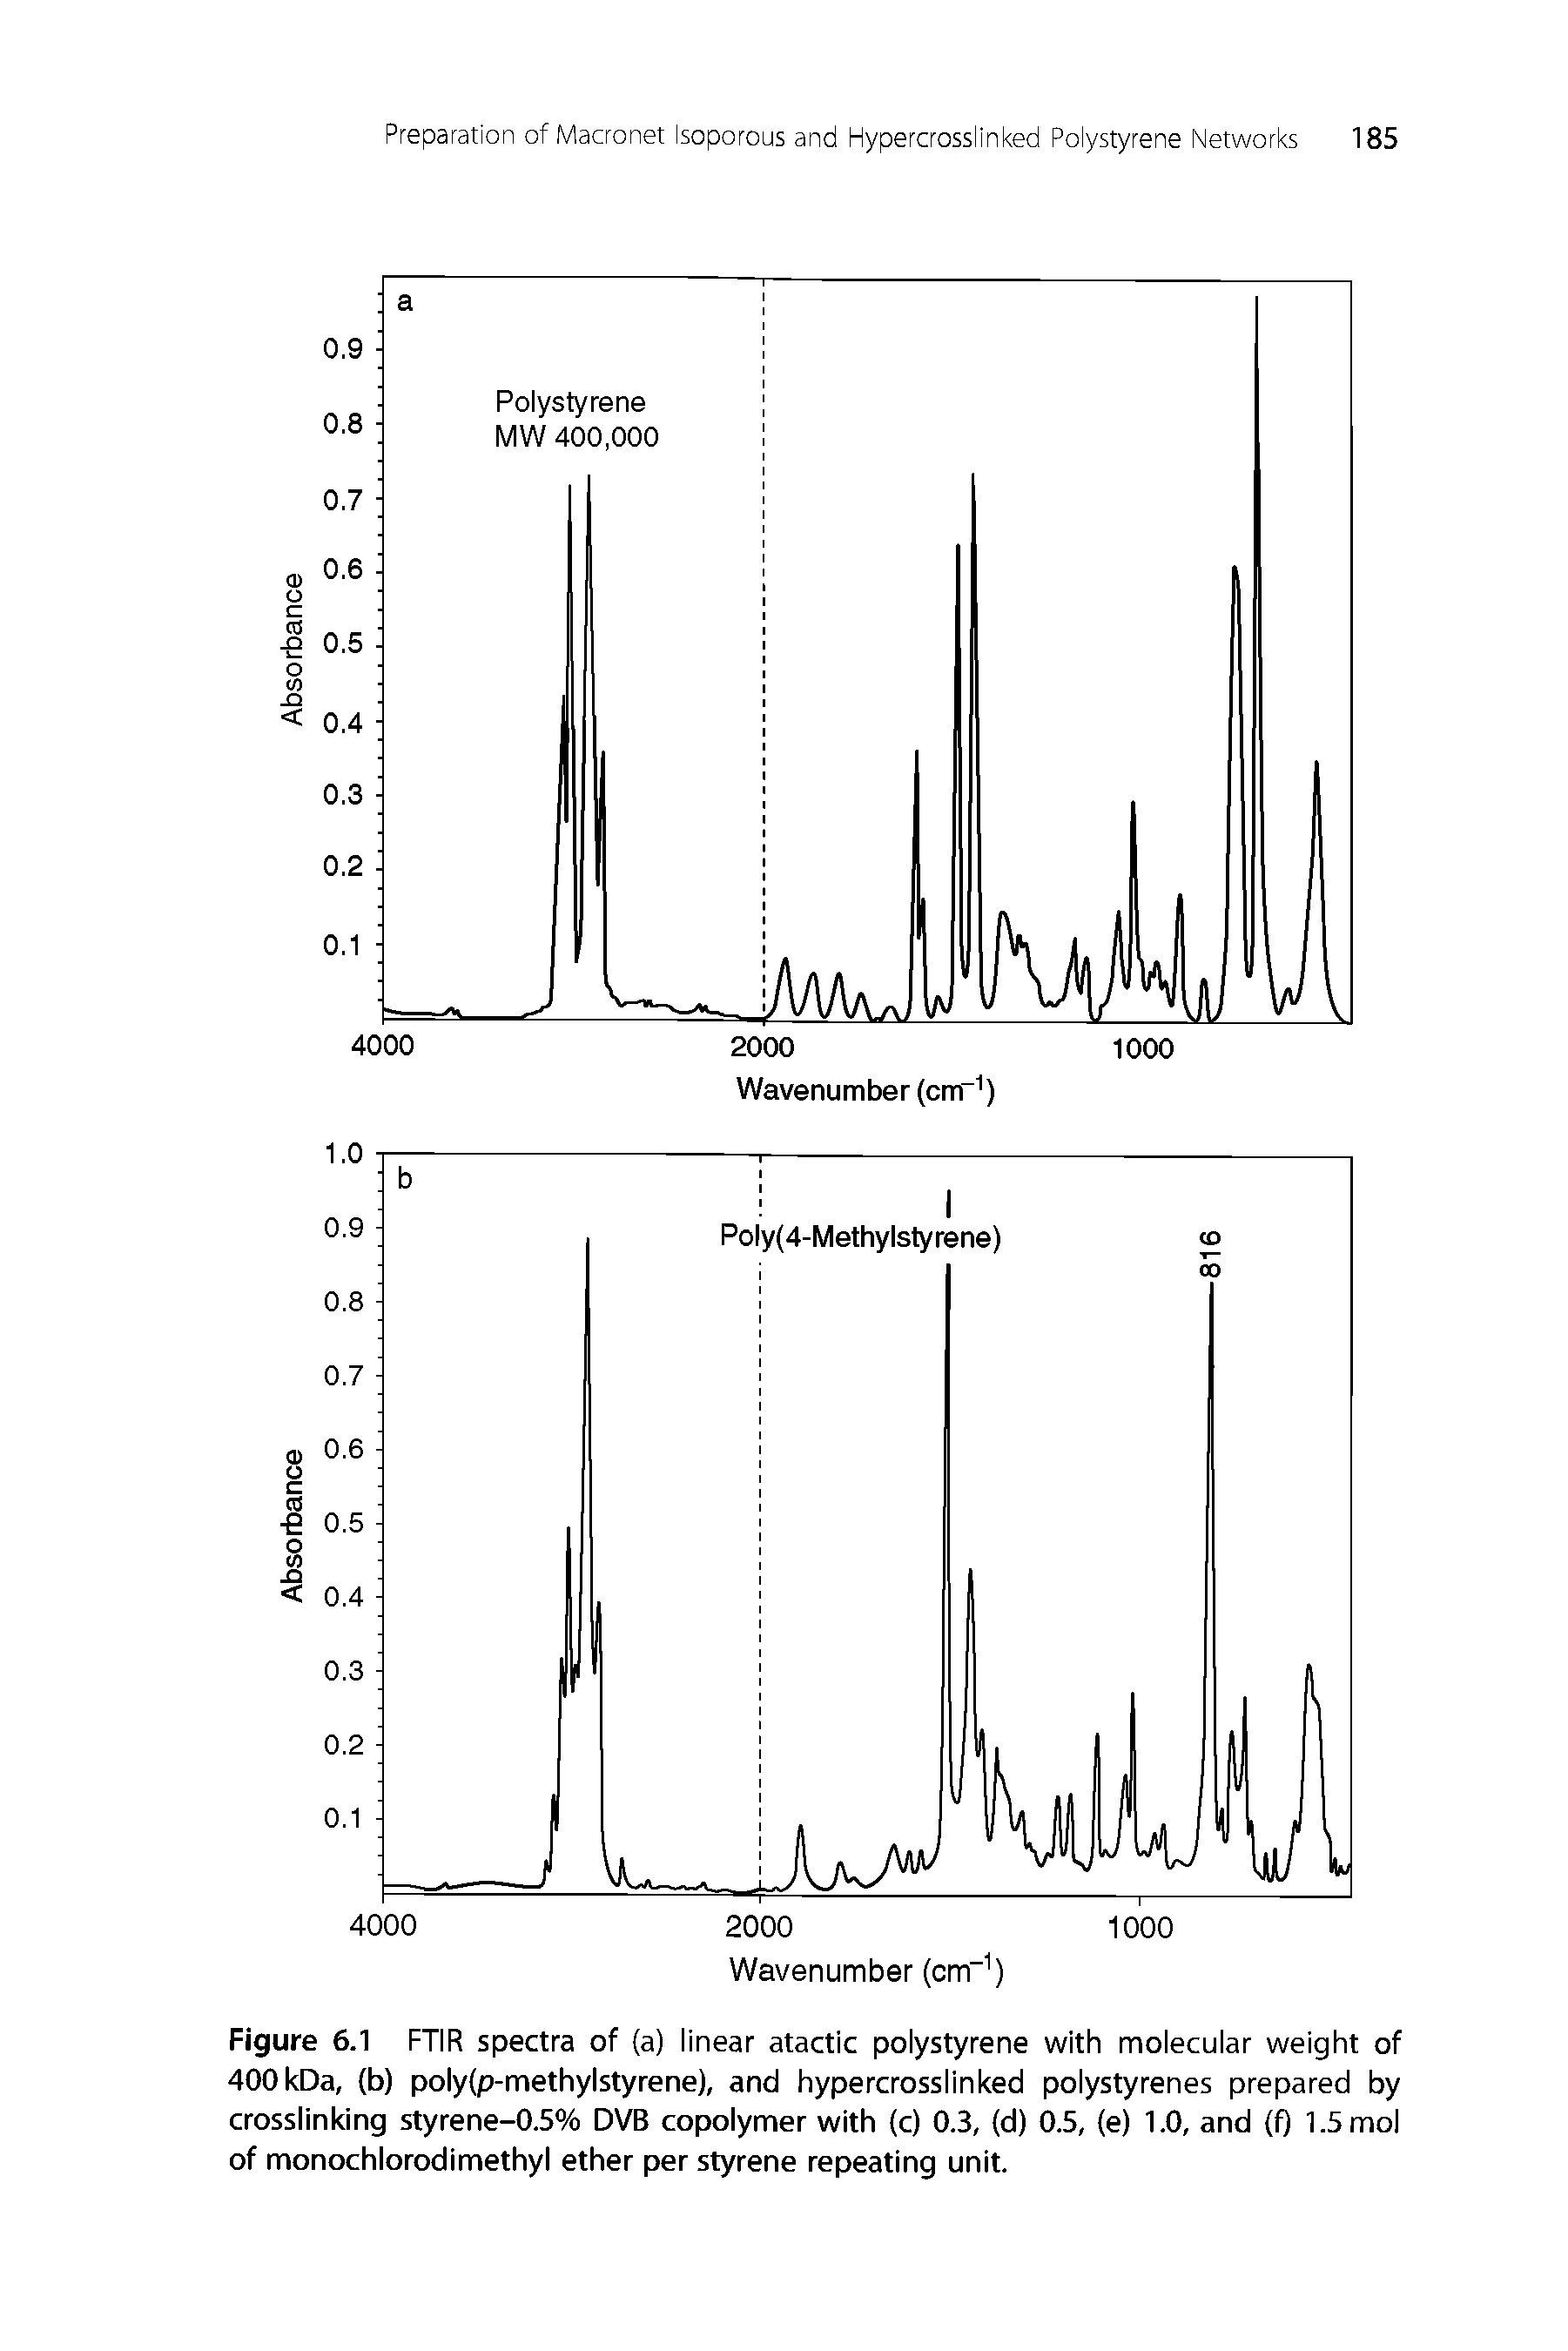 Figure 6.1 FTIR spectra of (a) linear atactic polystyrene with molecular weight of 400 kDa, (b) poly(p-methylstyrene), and hypercrosslinked polystyrenes prepared by crosslinking styrene-0.5% DVB copolymer with (c) 0.3, (d) 0.5, (e) 1.0, and (0 1.5 mol of monochlorodimethyl ether per styrene repeating unit.